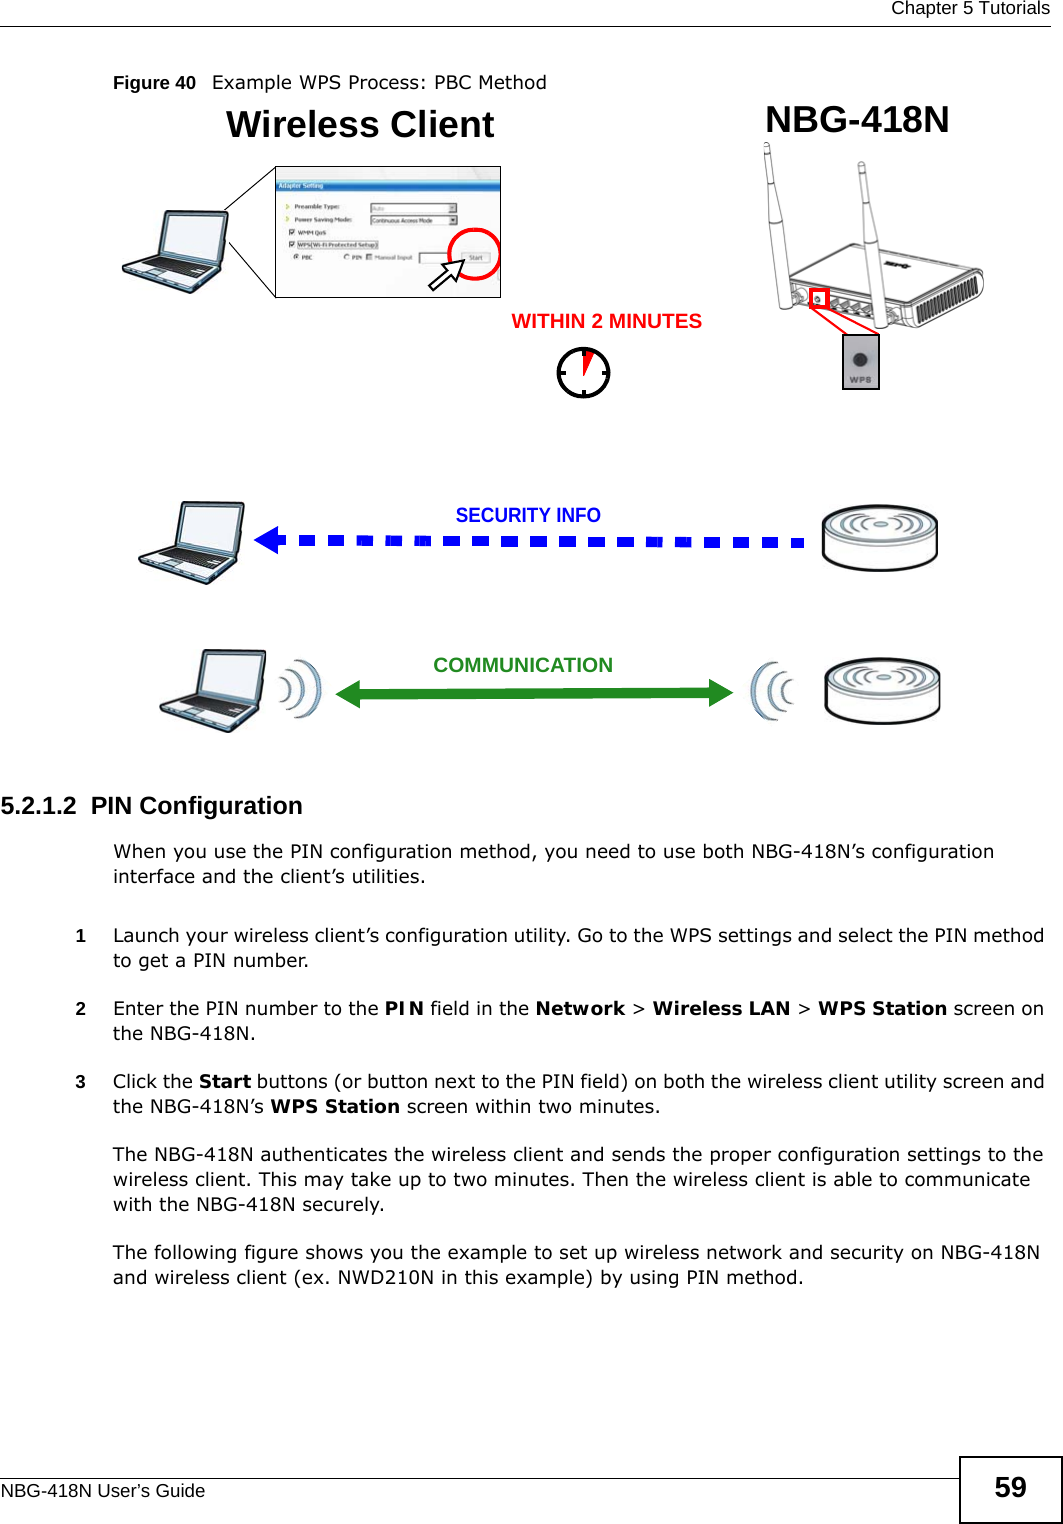  Chapter 5 TutorialsNBG-418N User’s Guide 59Figure 40   Example WPS Process: PBC Method5.2.1.2  PIN ConfigurationWhen you use the PIN configuration method, you need to use both NBG-418N’s configuration interface and the client’s utilities.1Launch your wireless client’s configuration utility. Go to the WPS settings and select the PIN method to get a PIN number.2Enter the PIN number to the PIN field in the Network &gt; Wireless LAN &gt; WPS Station screen on the NBG-418N.3Click the Start buttons (or button next to the PIN field) on both the wireless client utility screen and the NBG-418N’s WPS Station screen within two minutes.The NBG-418N authenticates the wireless client and sends the proper configuration settings to the wireless client. This may take up to two minutes. Then the wireless client is able to communicate with the NBG-418N securely. The following figure shows you the example to set up wireless network and security on NBG-418N and wireless client (ex. NWD210N in this example) by using PIN method. Wireless Client    NBG-418NSECURITY INFOCOMMUNICATIONWITHIN 2 MINUTES